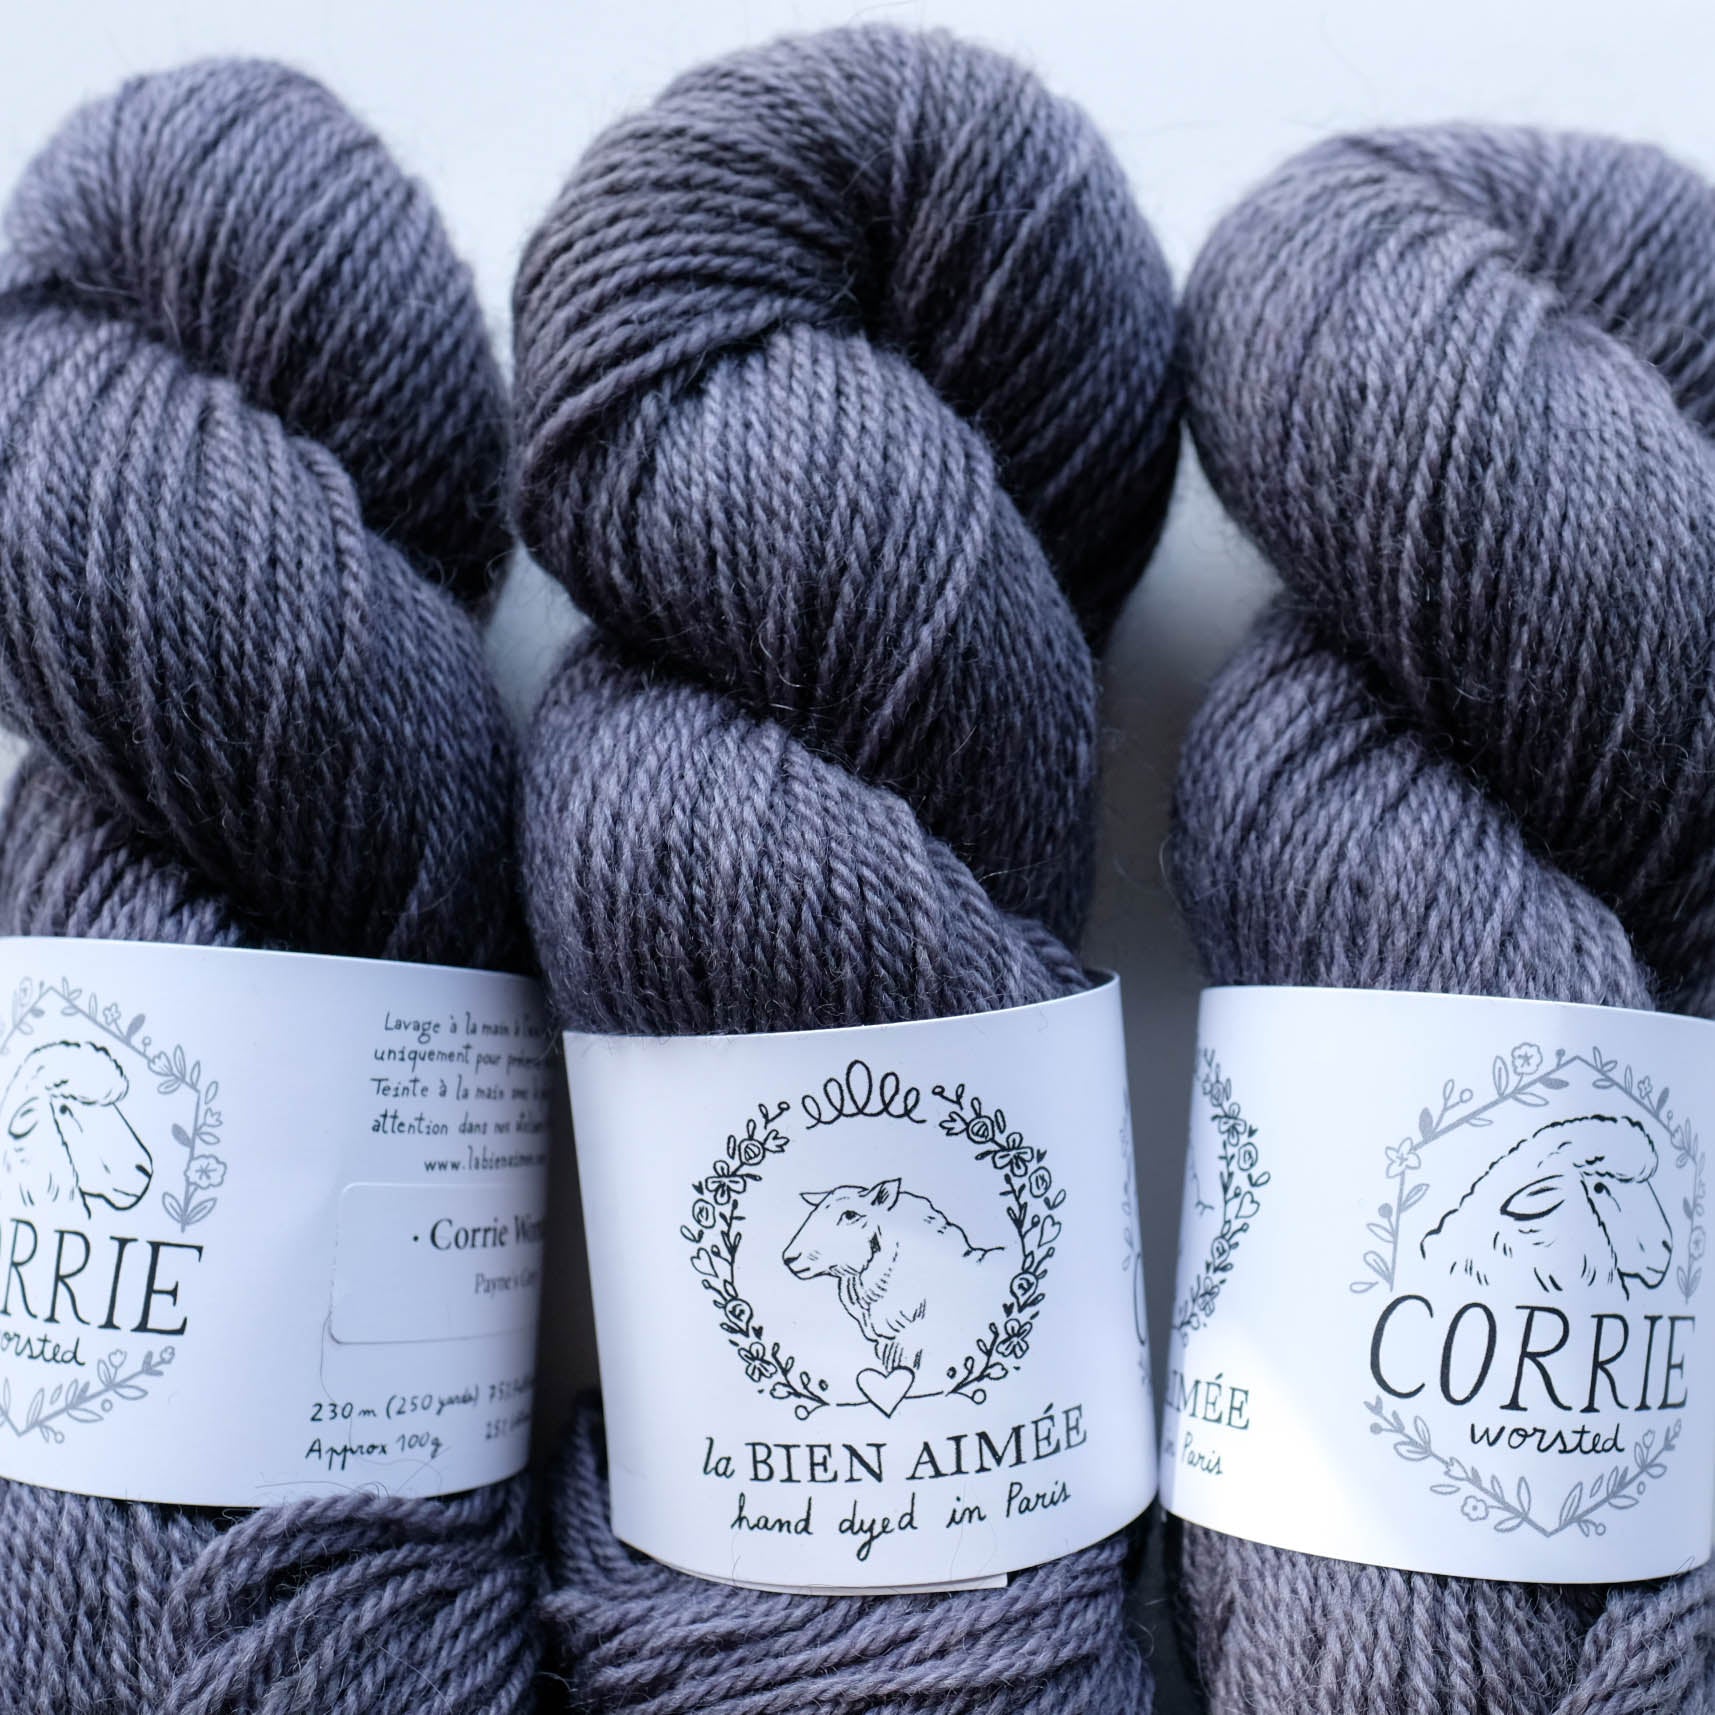 Corrie Worsted / Wensley Worsted / Corrie Confetti